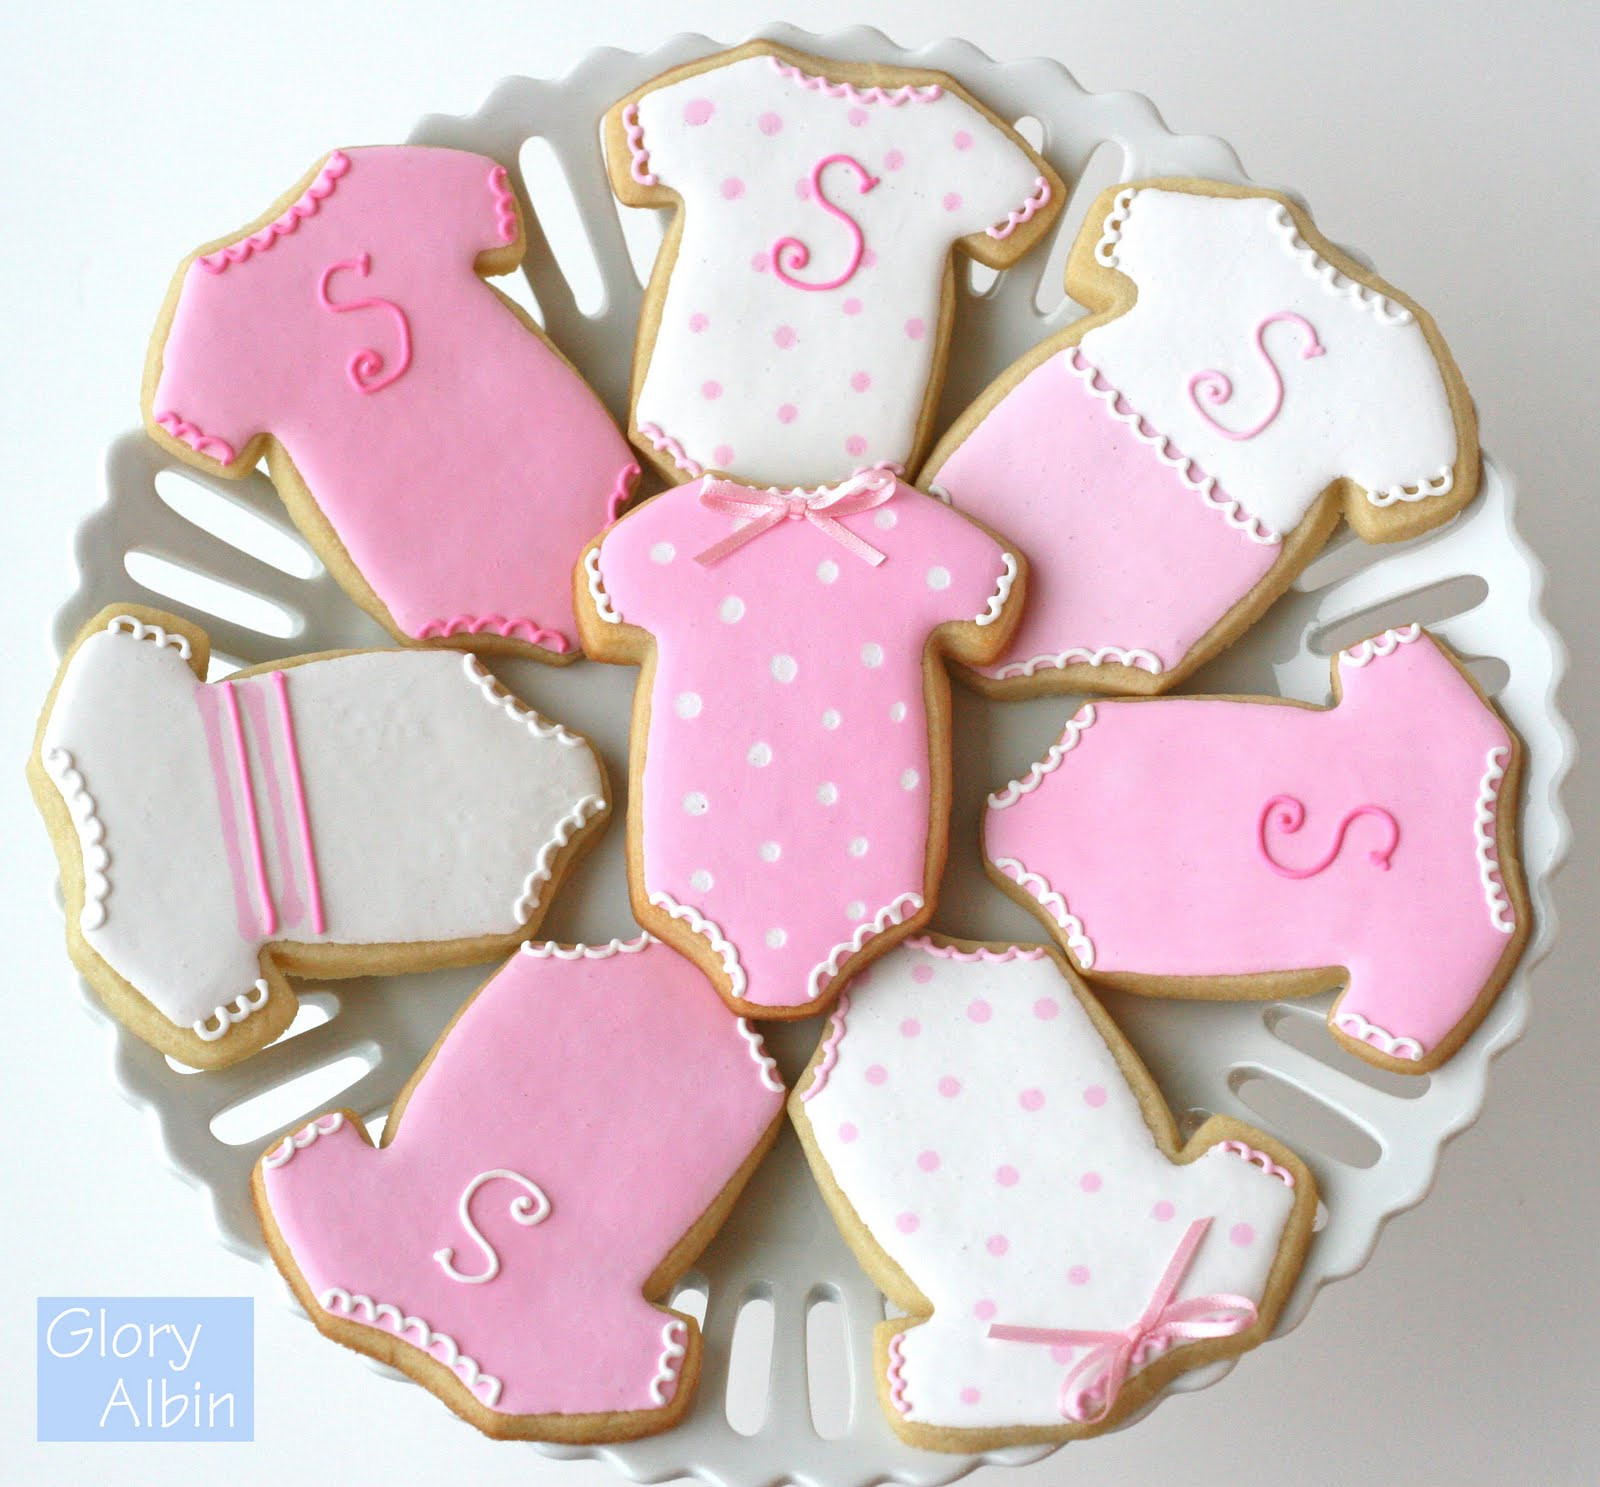 Baby Shower Sugar Cookies
 Decorating Sugar Cookies with Royal Icing – Glorious Treats